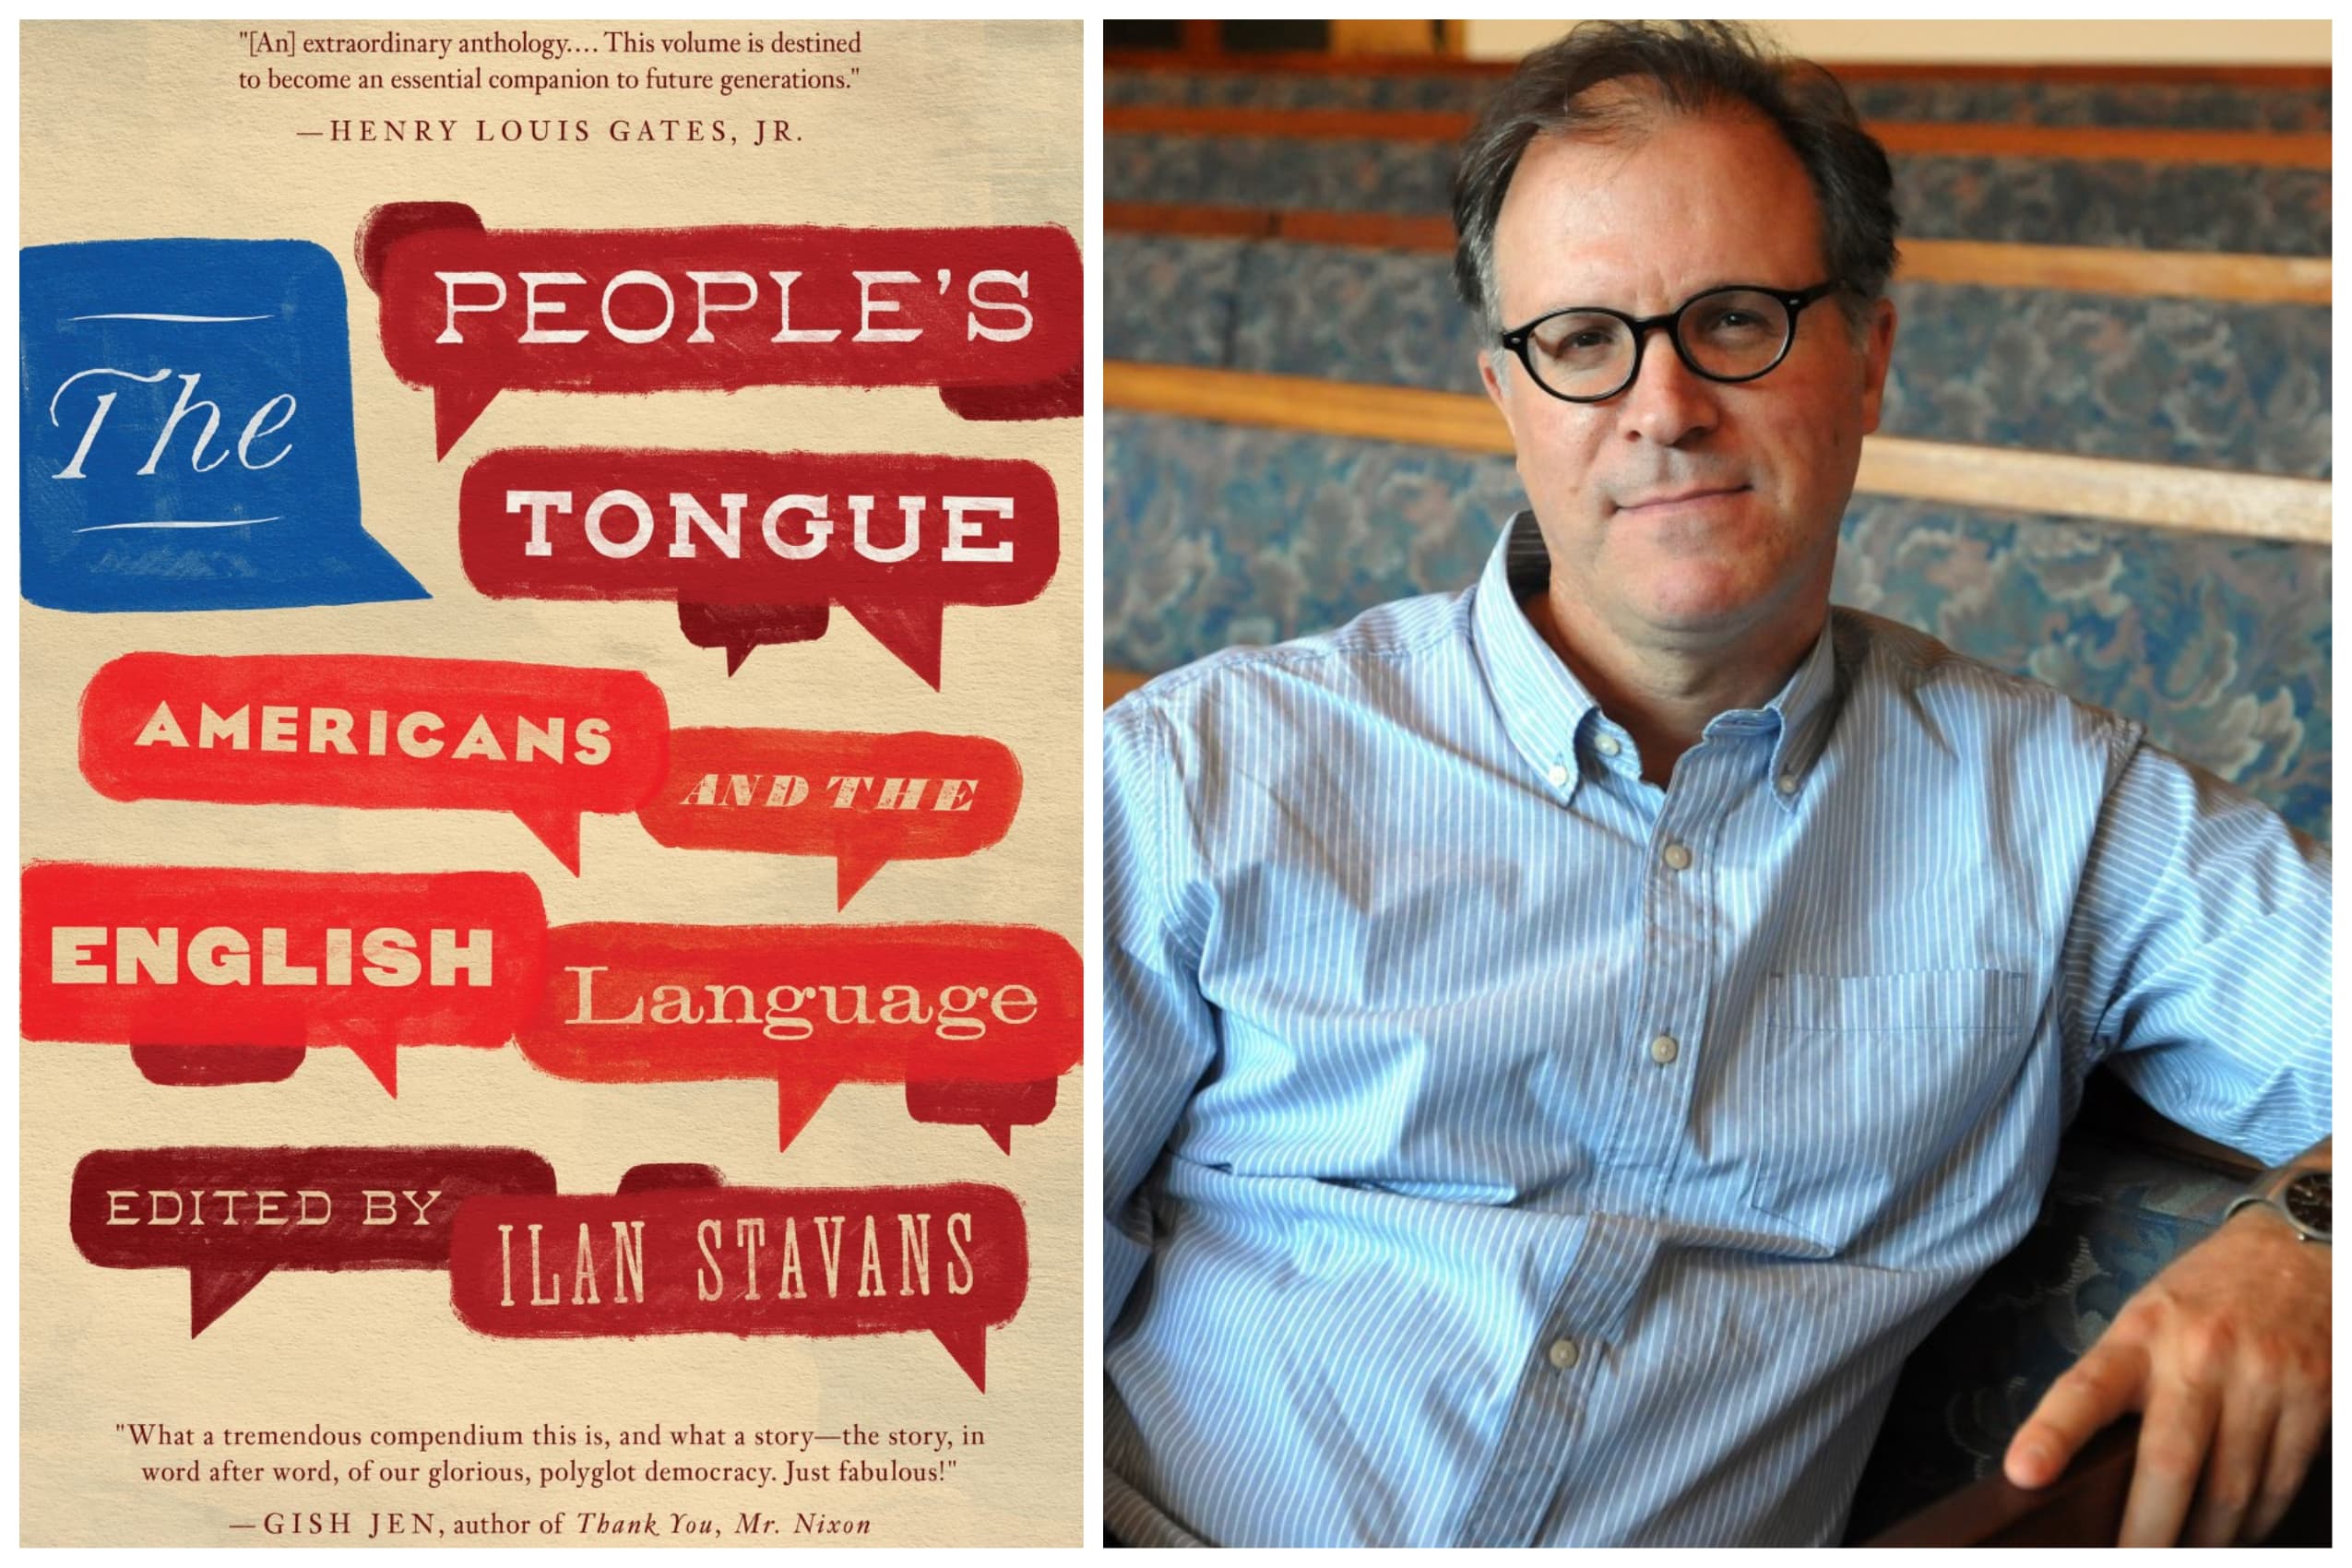 &quot;The People’s Tongue: Americans and the English Language&quot; is available Feb. 14. (Courtesy Restless Books)